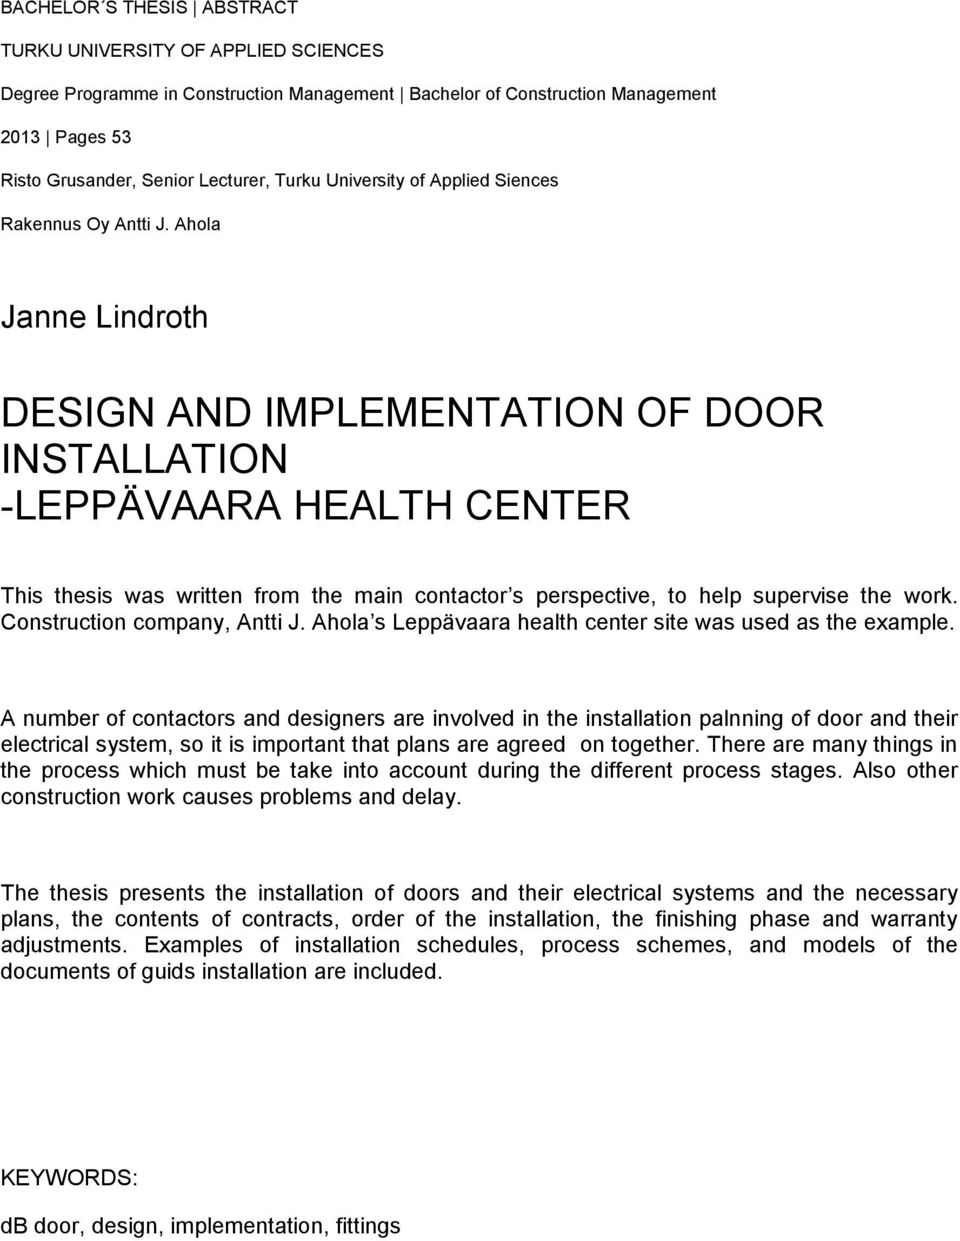 Ahola Janne Lindroth DESIGN AND IMPLEMENTATION OF DOOR INSTALLATION -LEPPÄVAARA HEALTH CENTER This thesis was written from the main contactor s perspective, to help supervise the work.